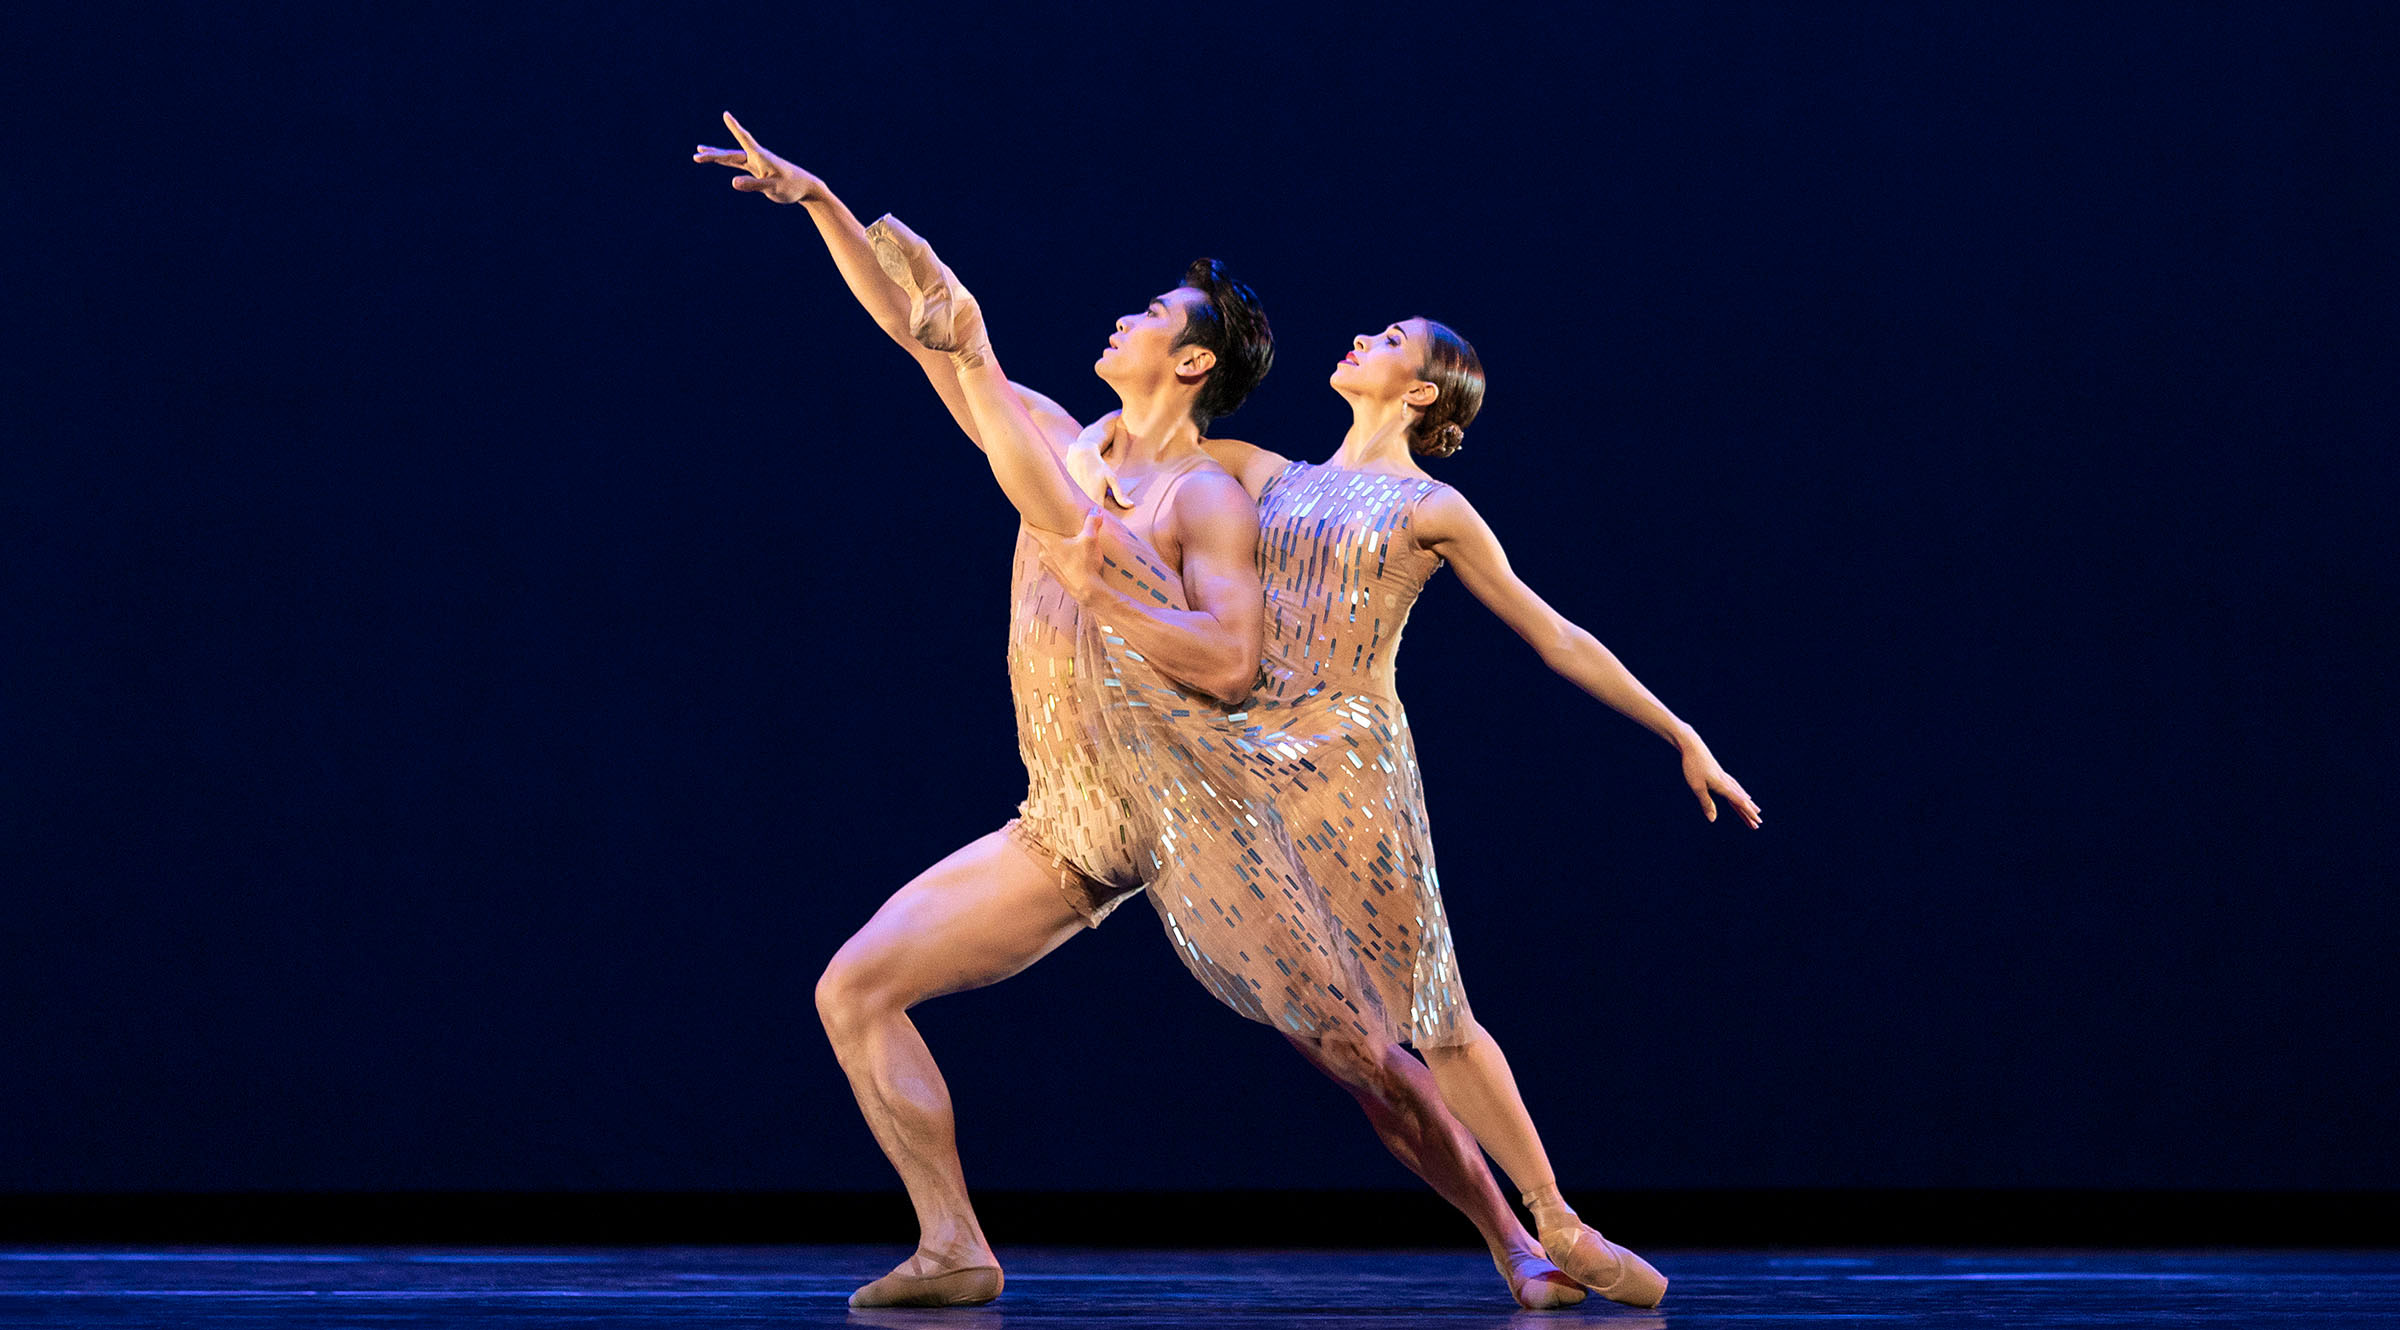 Ryoichi Hirano and Yasmine Nagdhi in 'Within the Golden Hour' part of '21st Century Choreographers' at The Royal Opera House